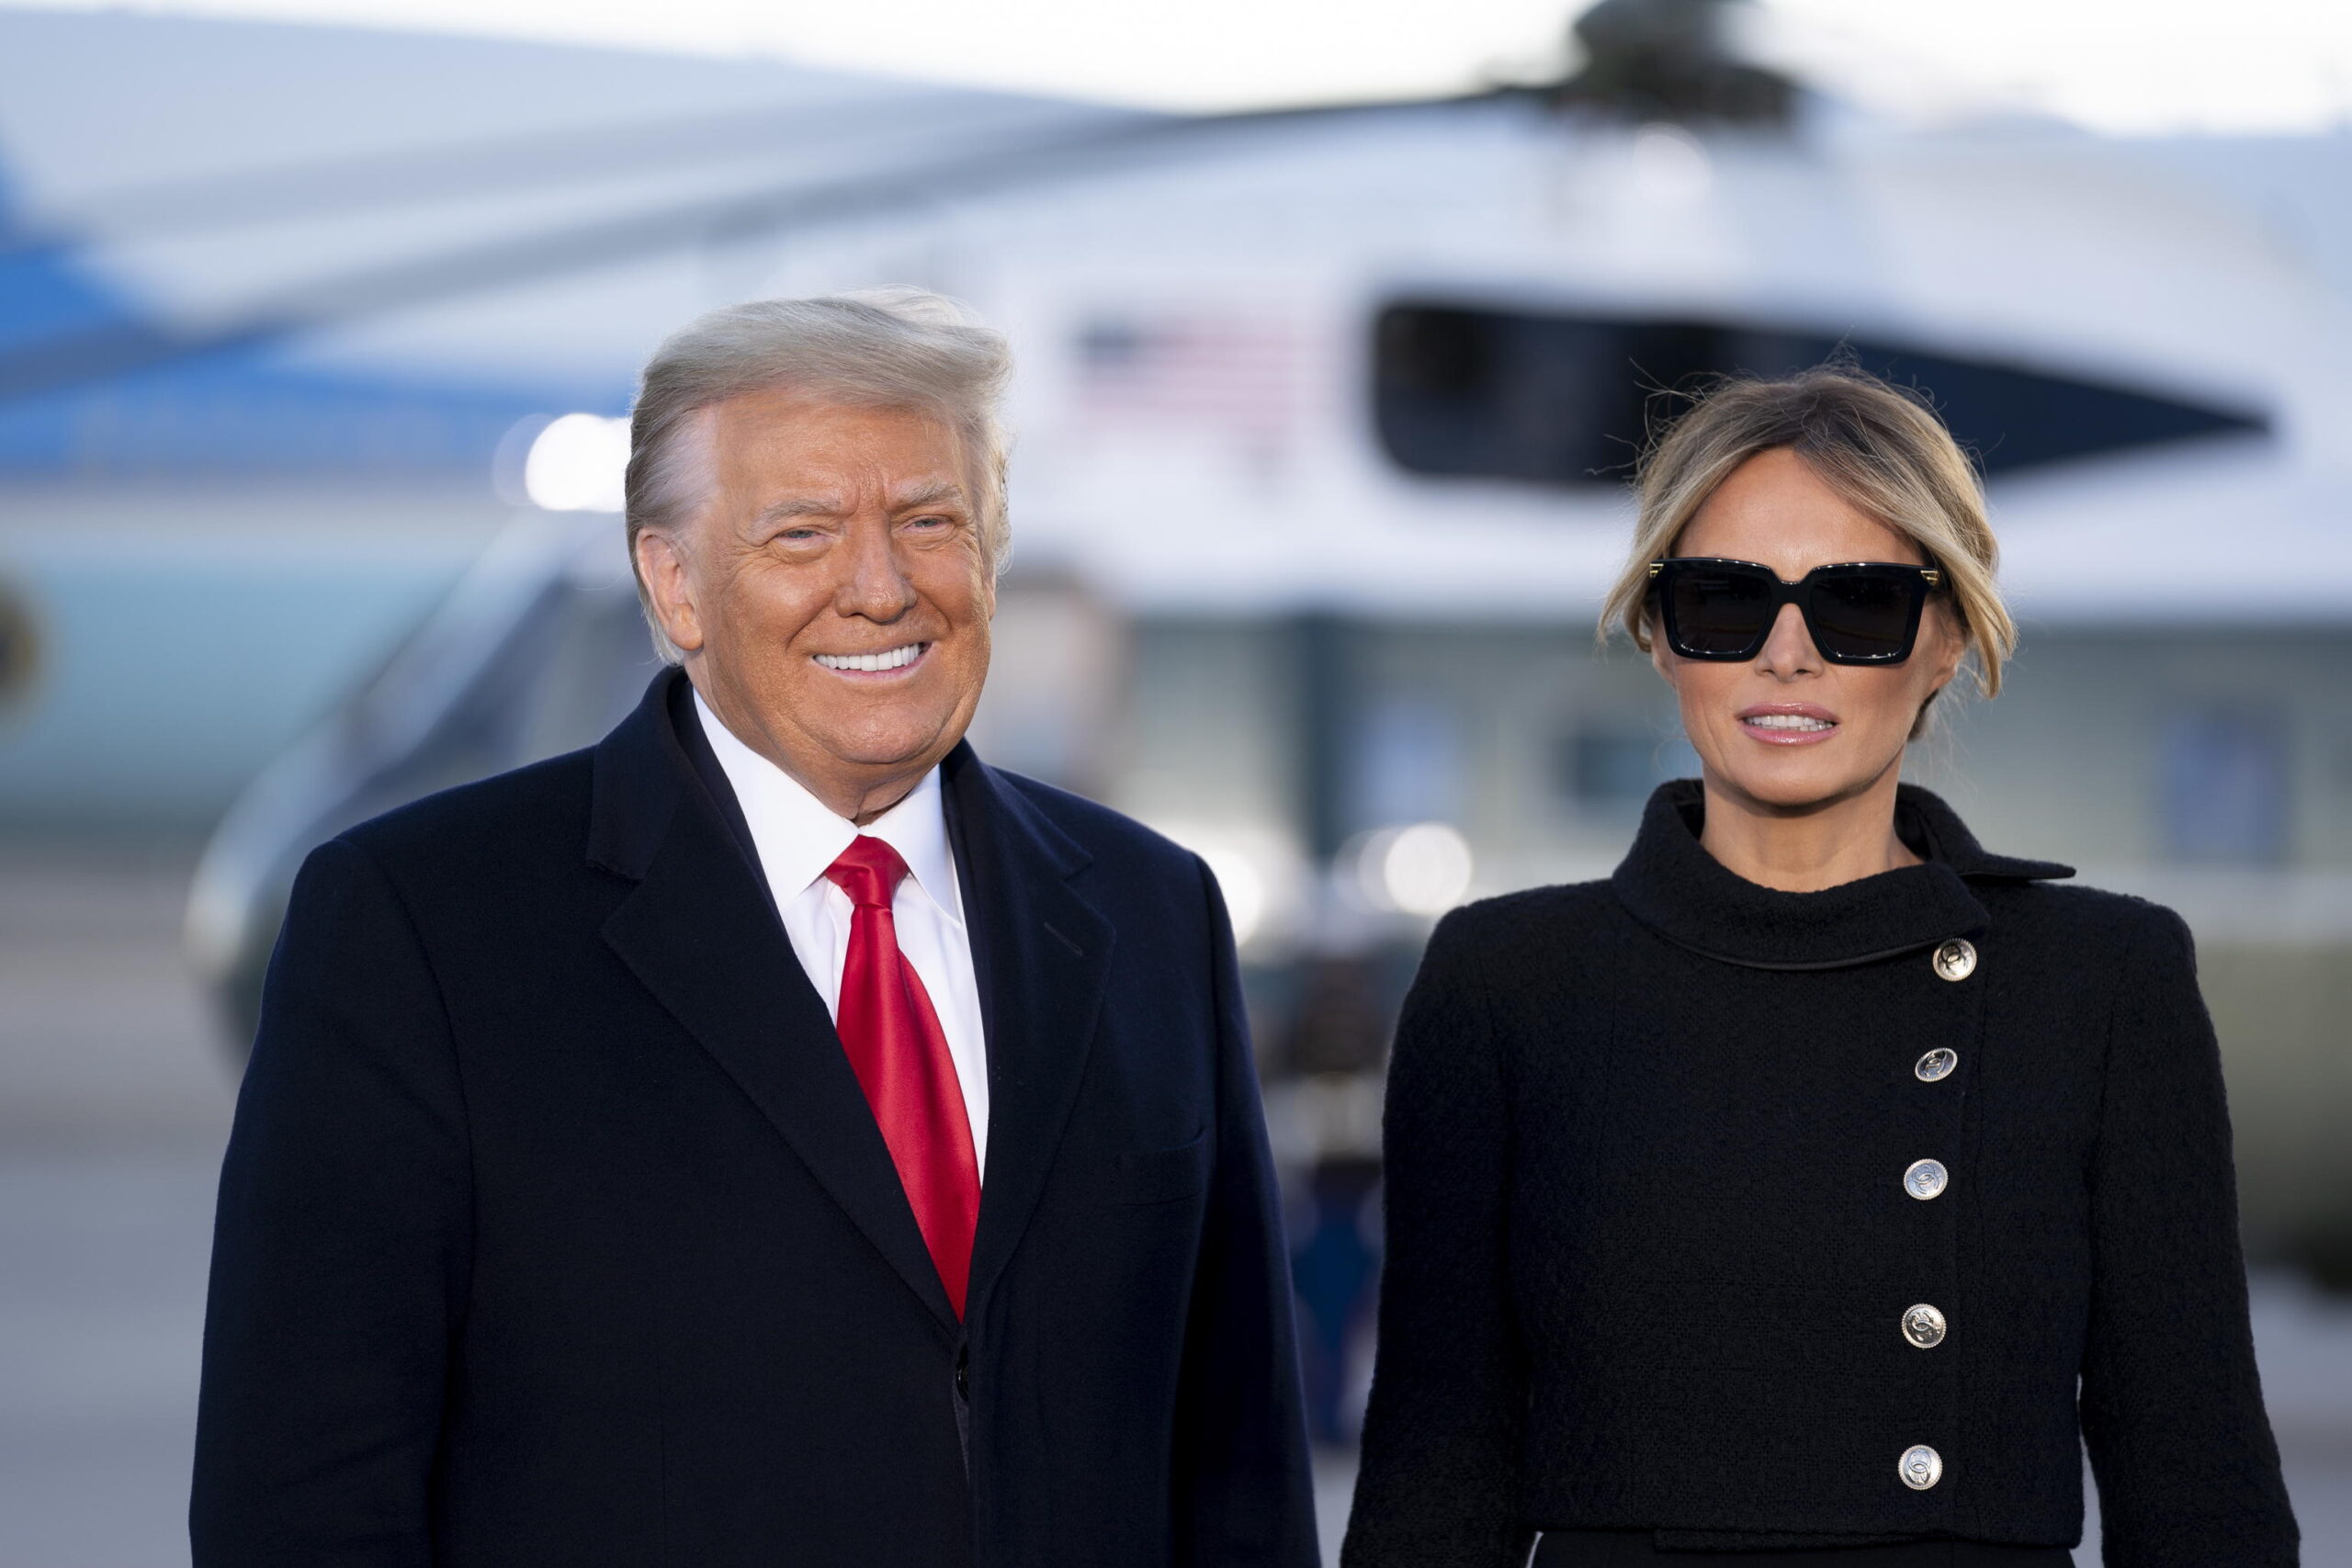 epa08951964 US President Donald Trump, left, and US First Lady Melania Trump arrive to a farewell ceremony at Joint Base Andrews, Maryland, USA, 20 January 2021. US President Donald J. Trump is not attending the Inaugration ceremony of President-elect Joe Biden. Biden won the 03 November 2020 election to become the 46th President of the United States of America.  EPA/Stefani Reynolds / POOL